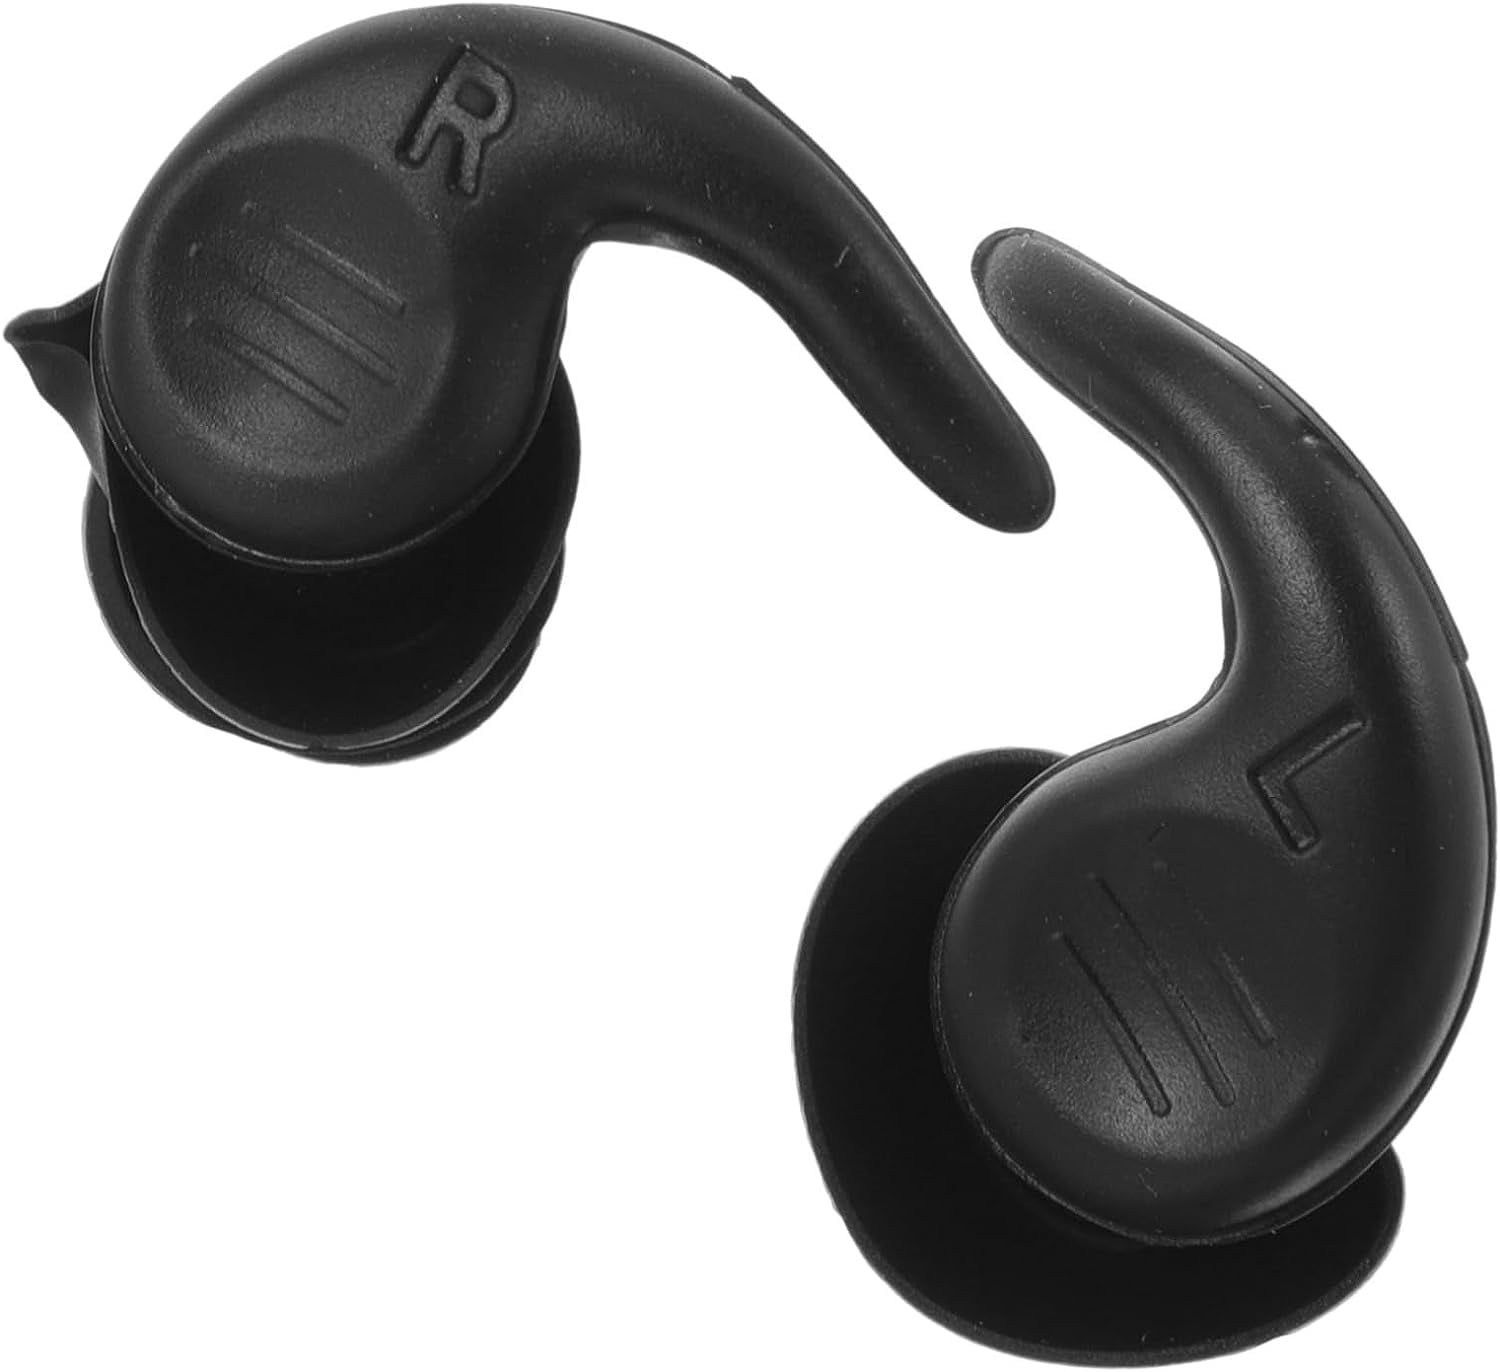 HEQUSIGNS 3Pairs Ear Plugs for Sleeping Noise Cancelling, Reusable